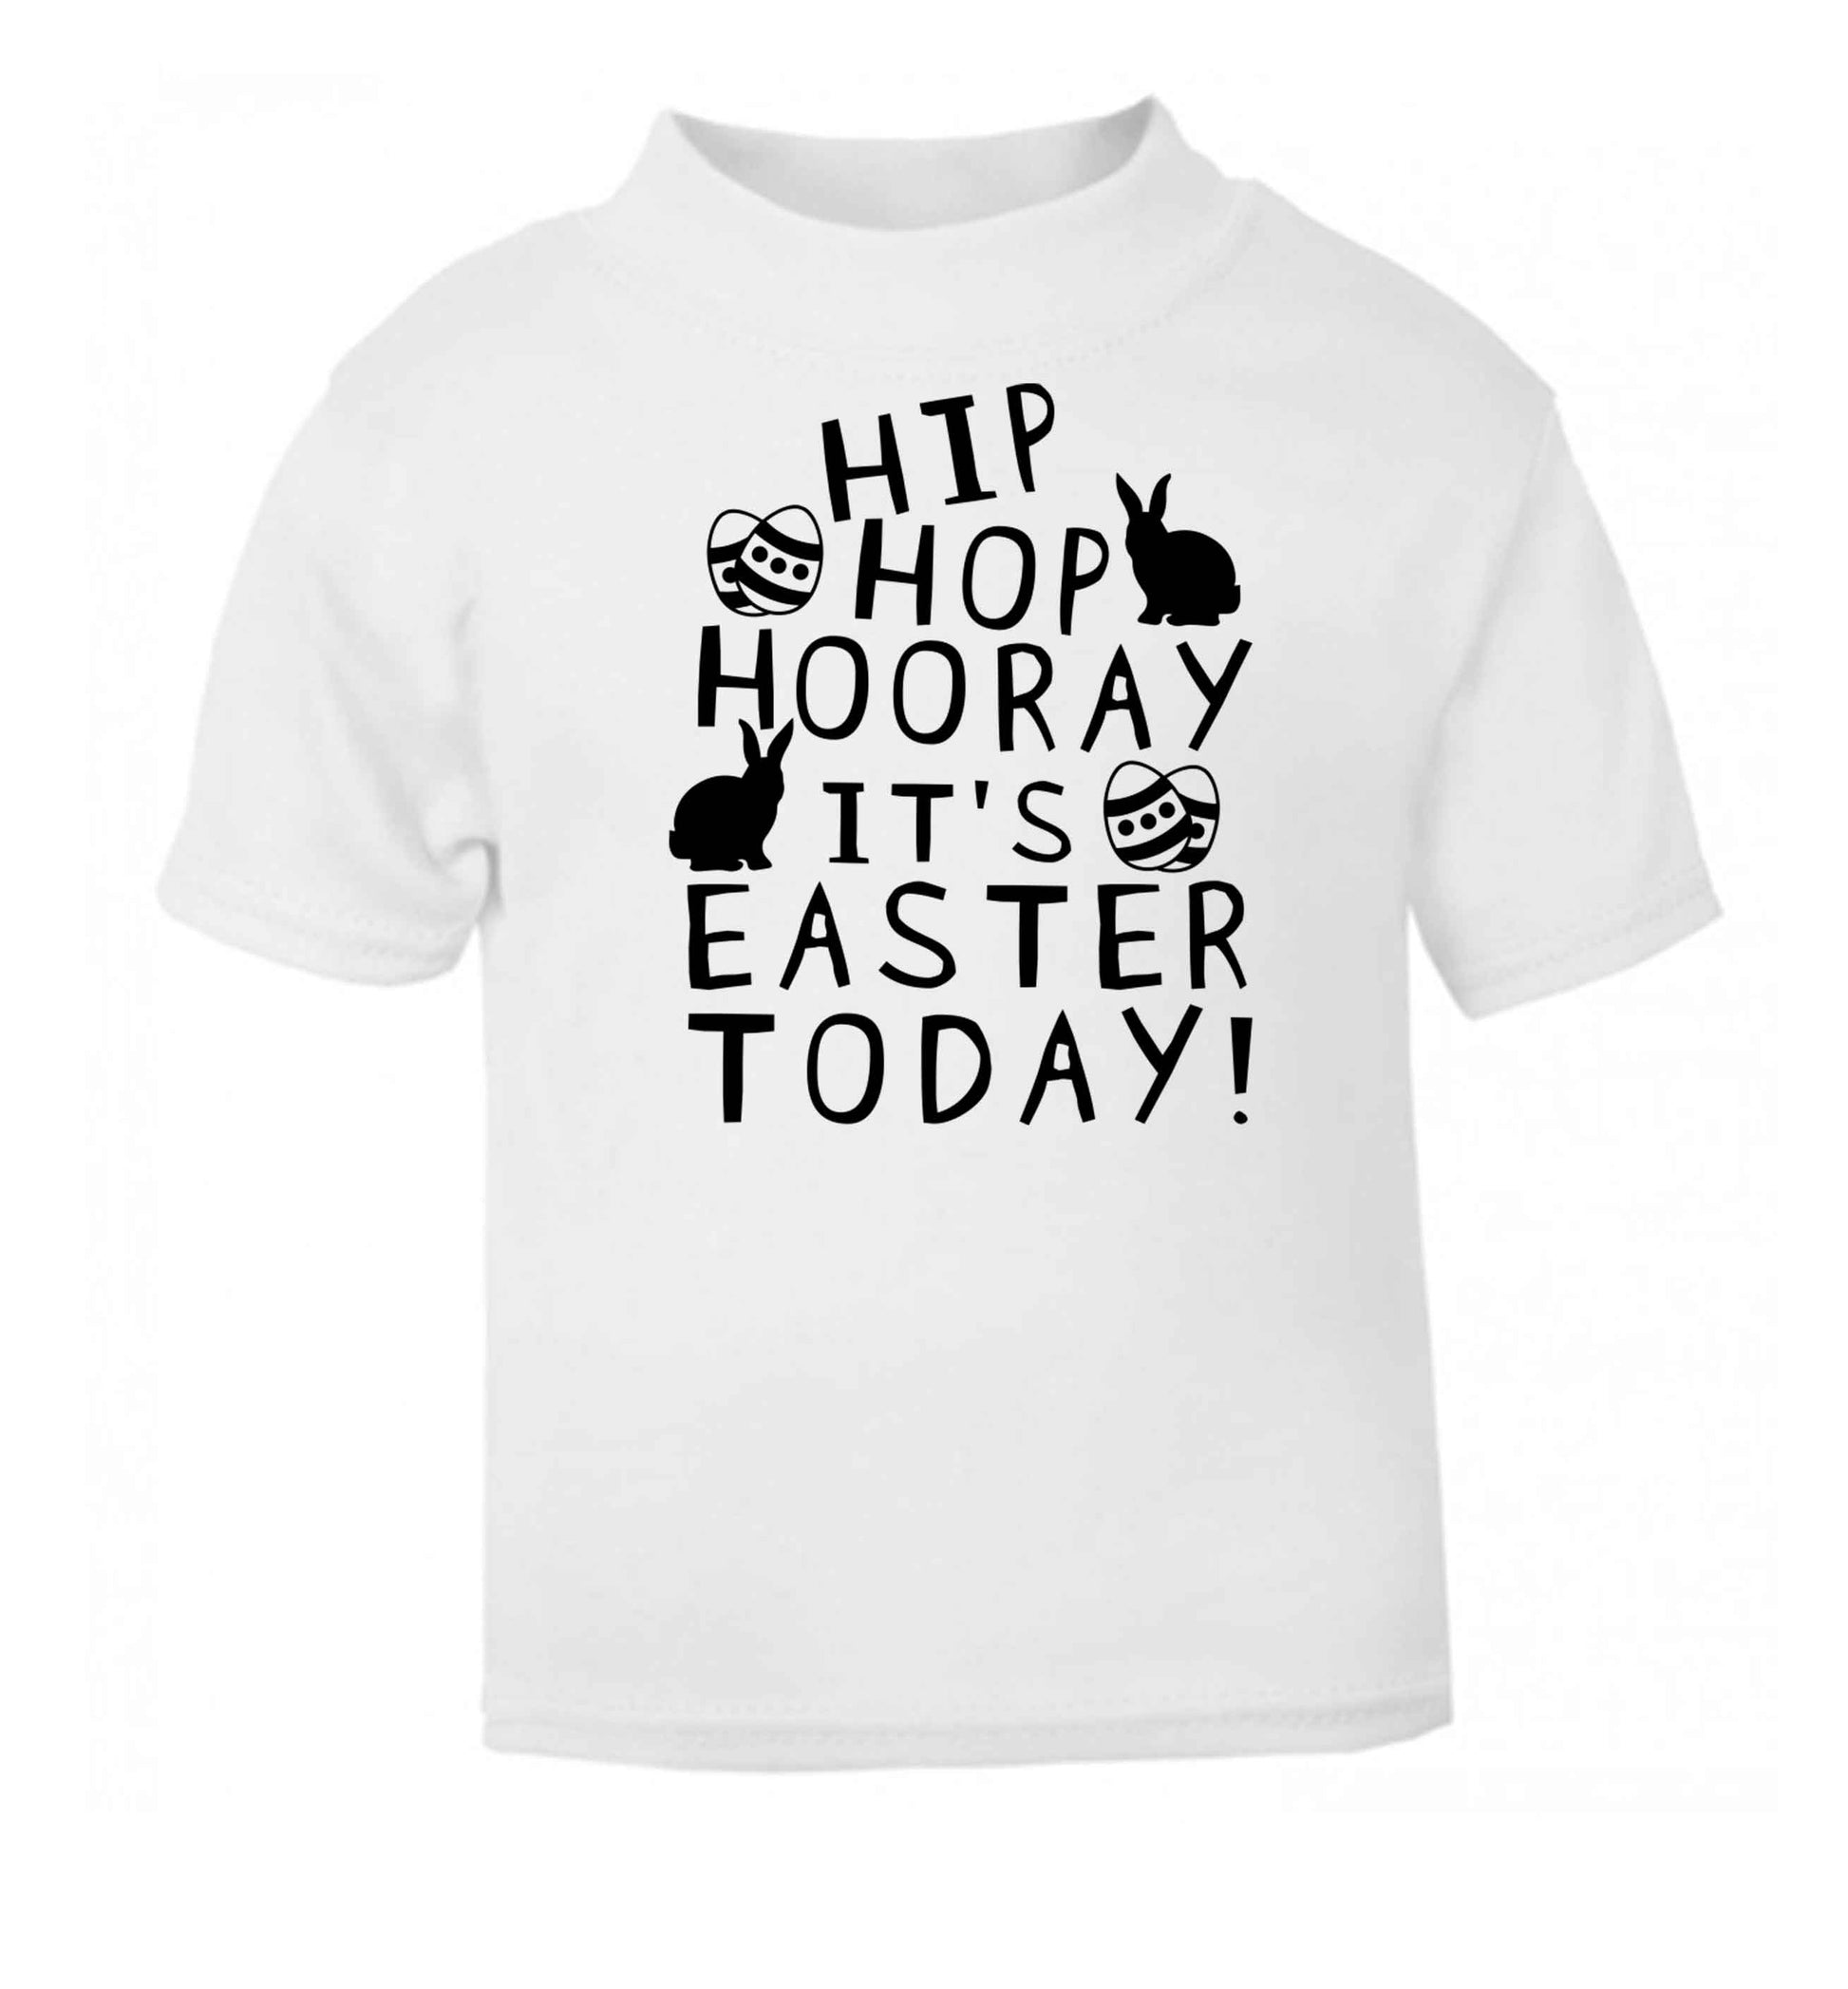 Hip hip hooray it's Easter today! white baby toddler Tshirt 2 Years